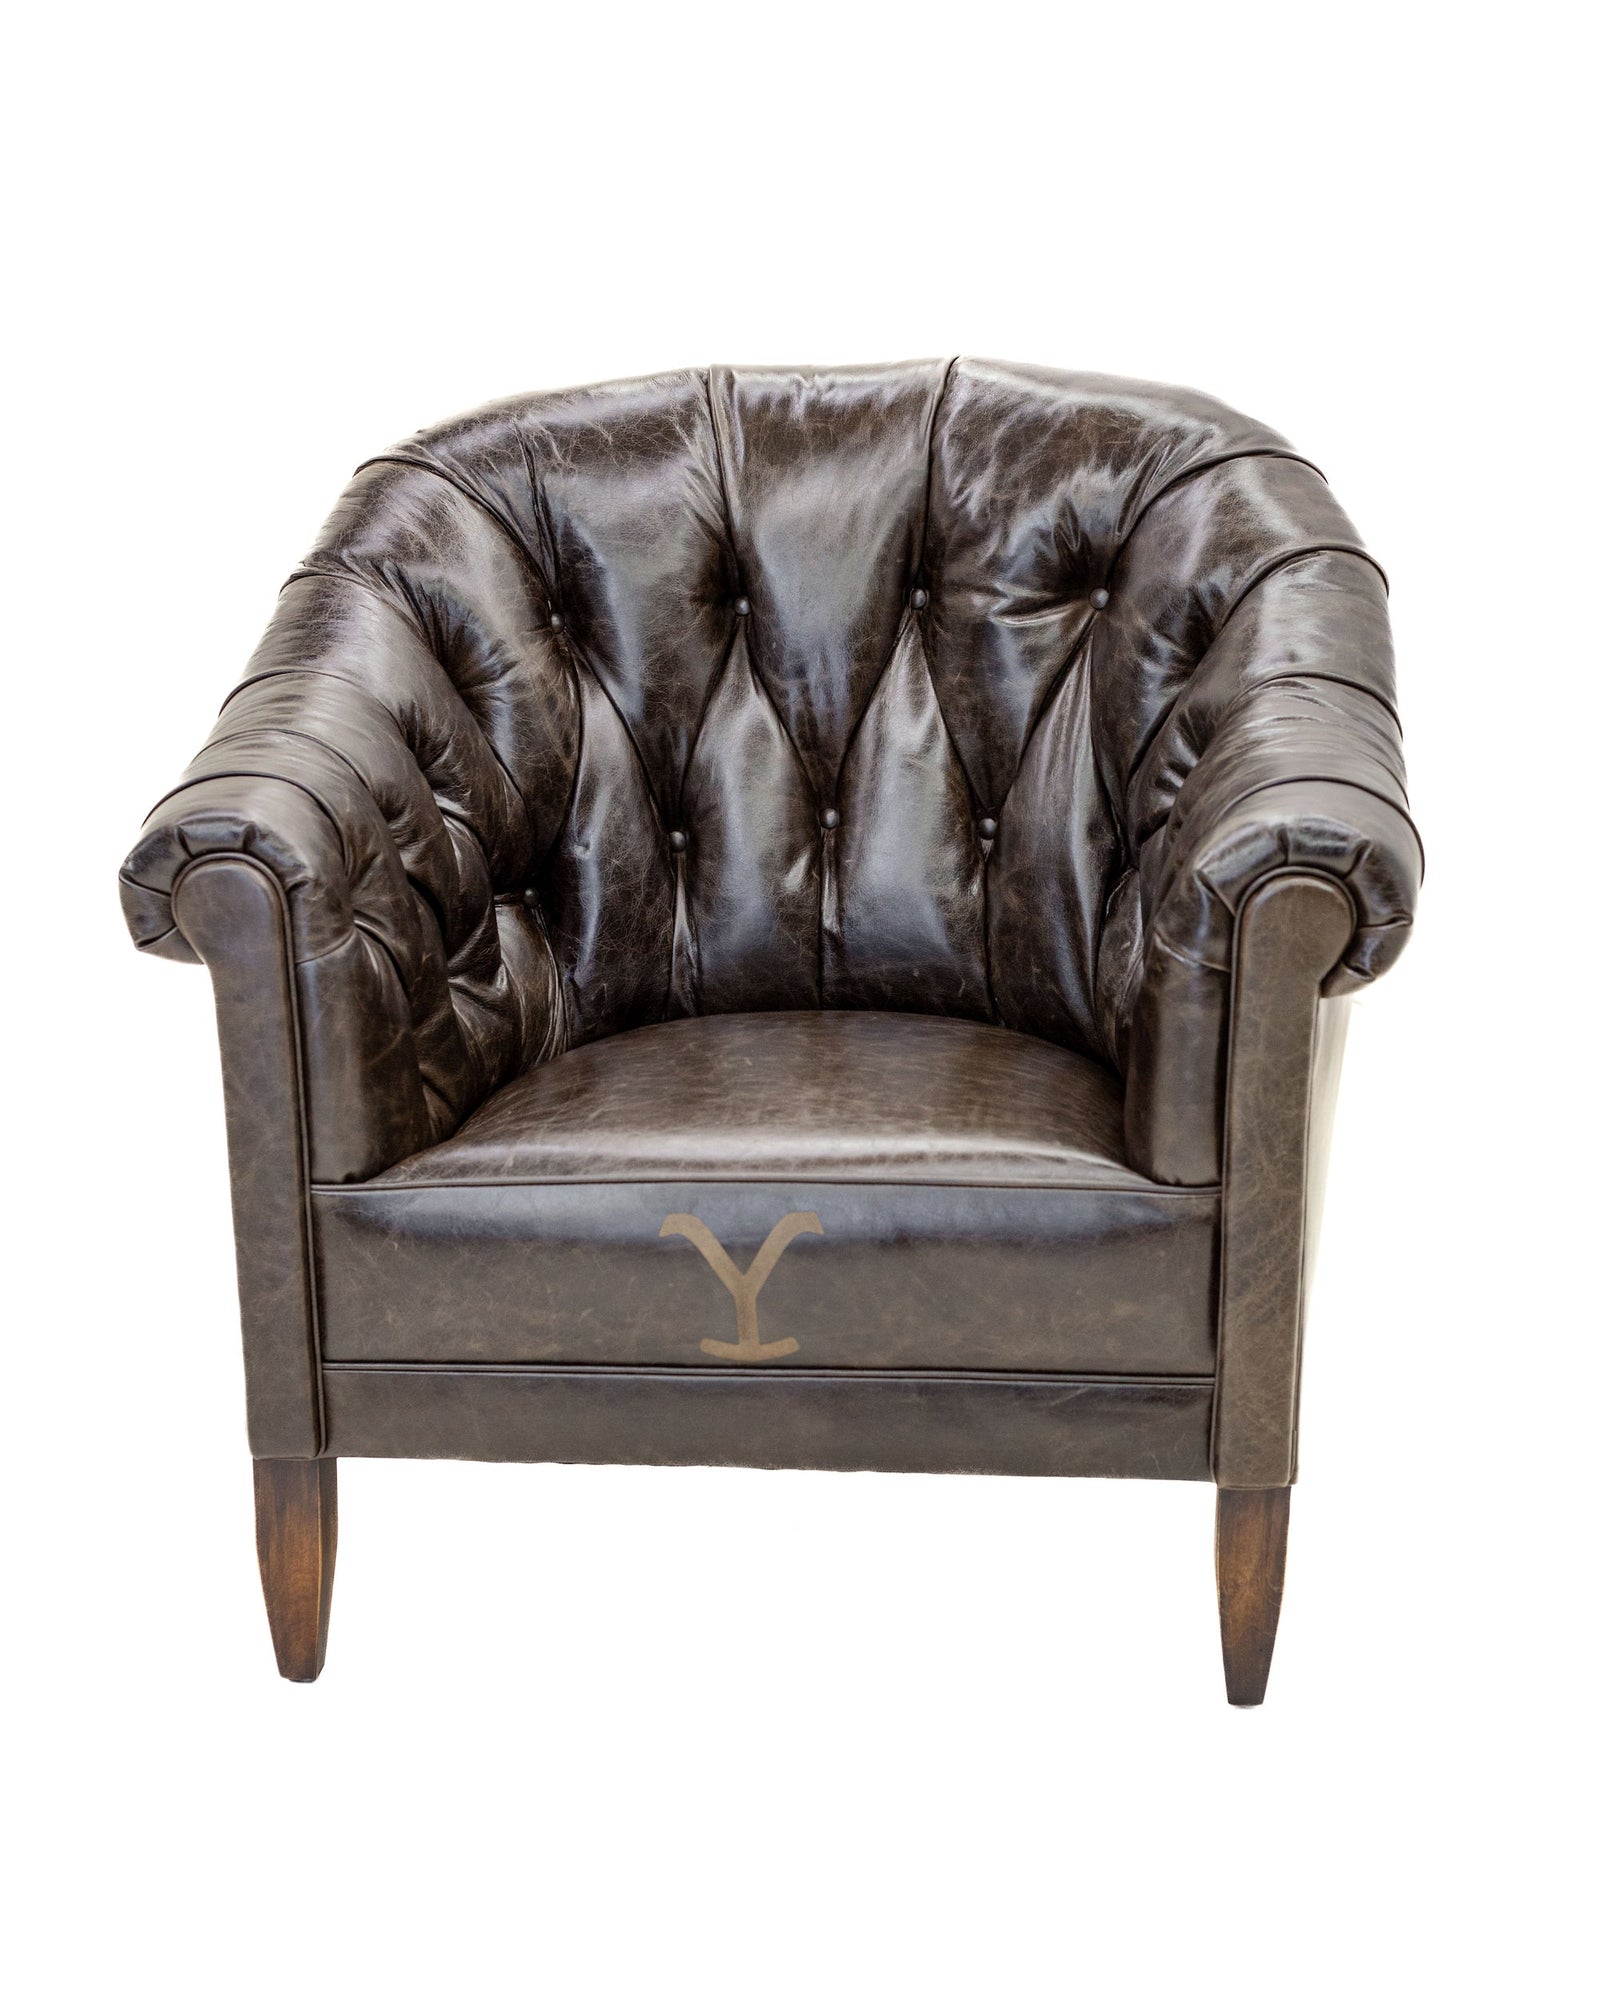 The Great Room Leather Chair